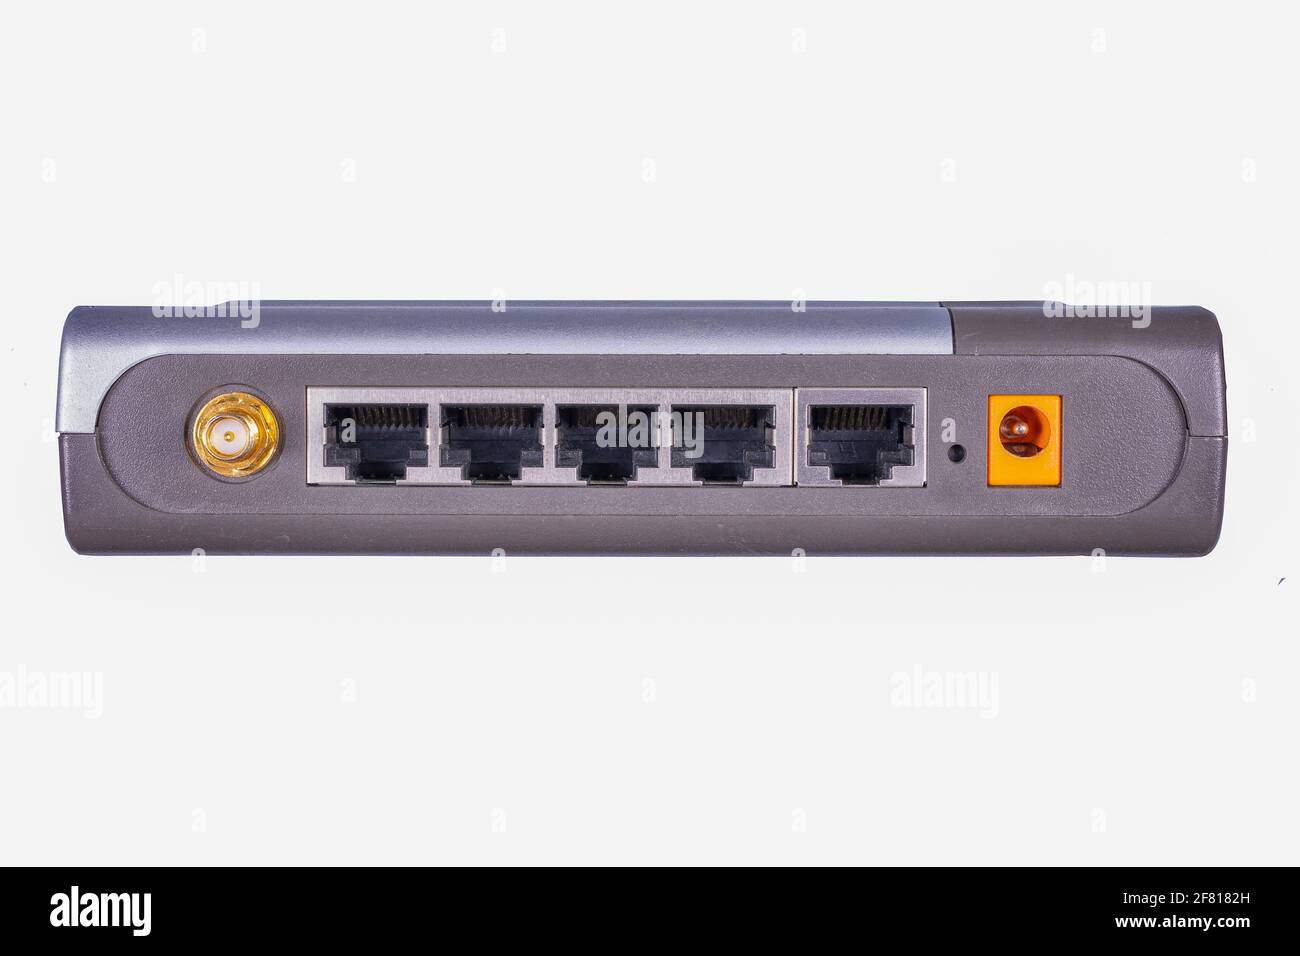 Old network router connectors. Connection point for a computer device. Isolated background. Stock Photo